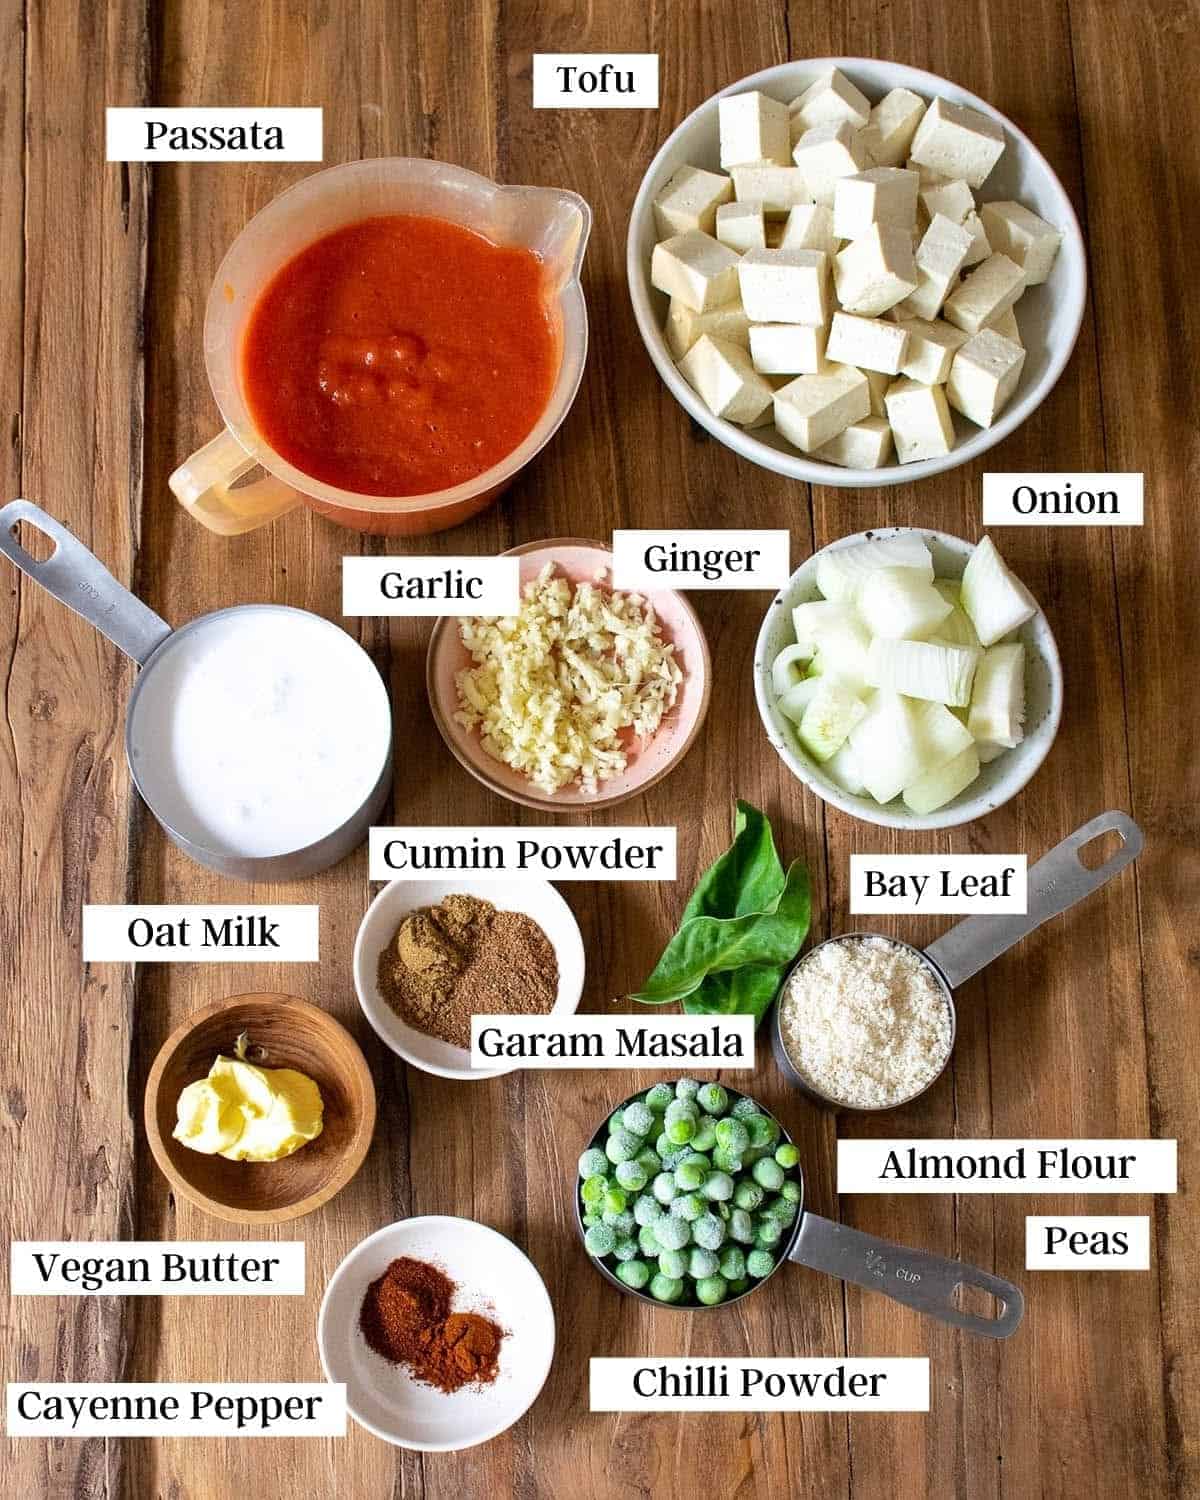 Ingredients for this curry laid out on a table